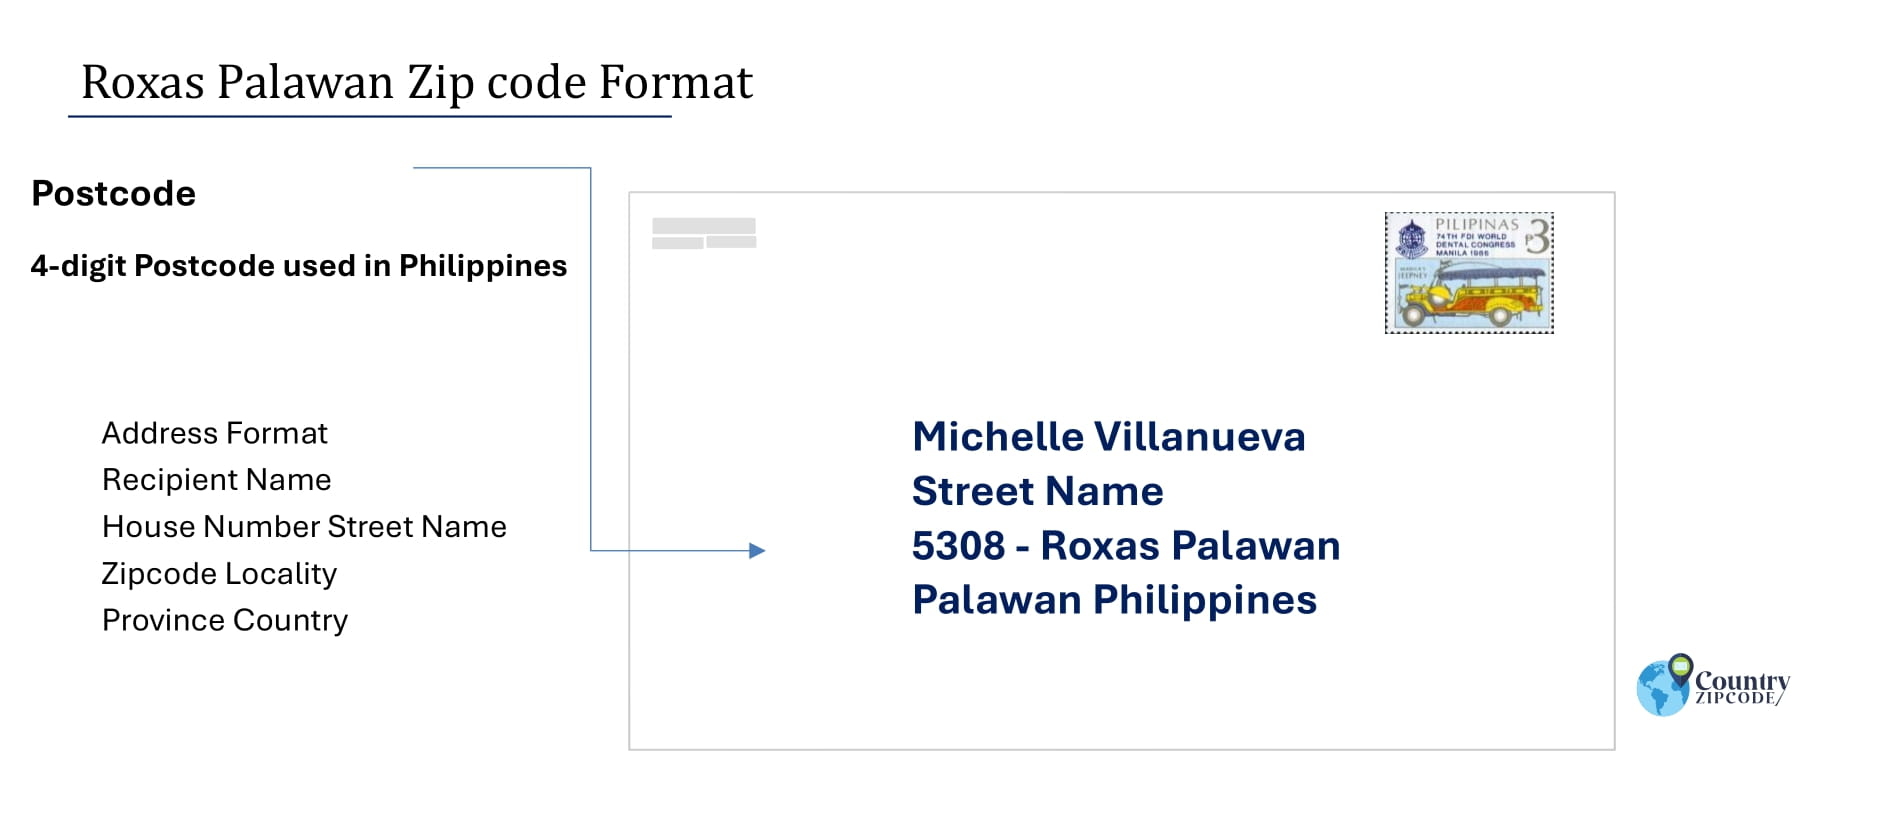 example of Roxas Palawan Philippines zip code and address format